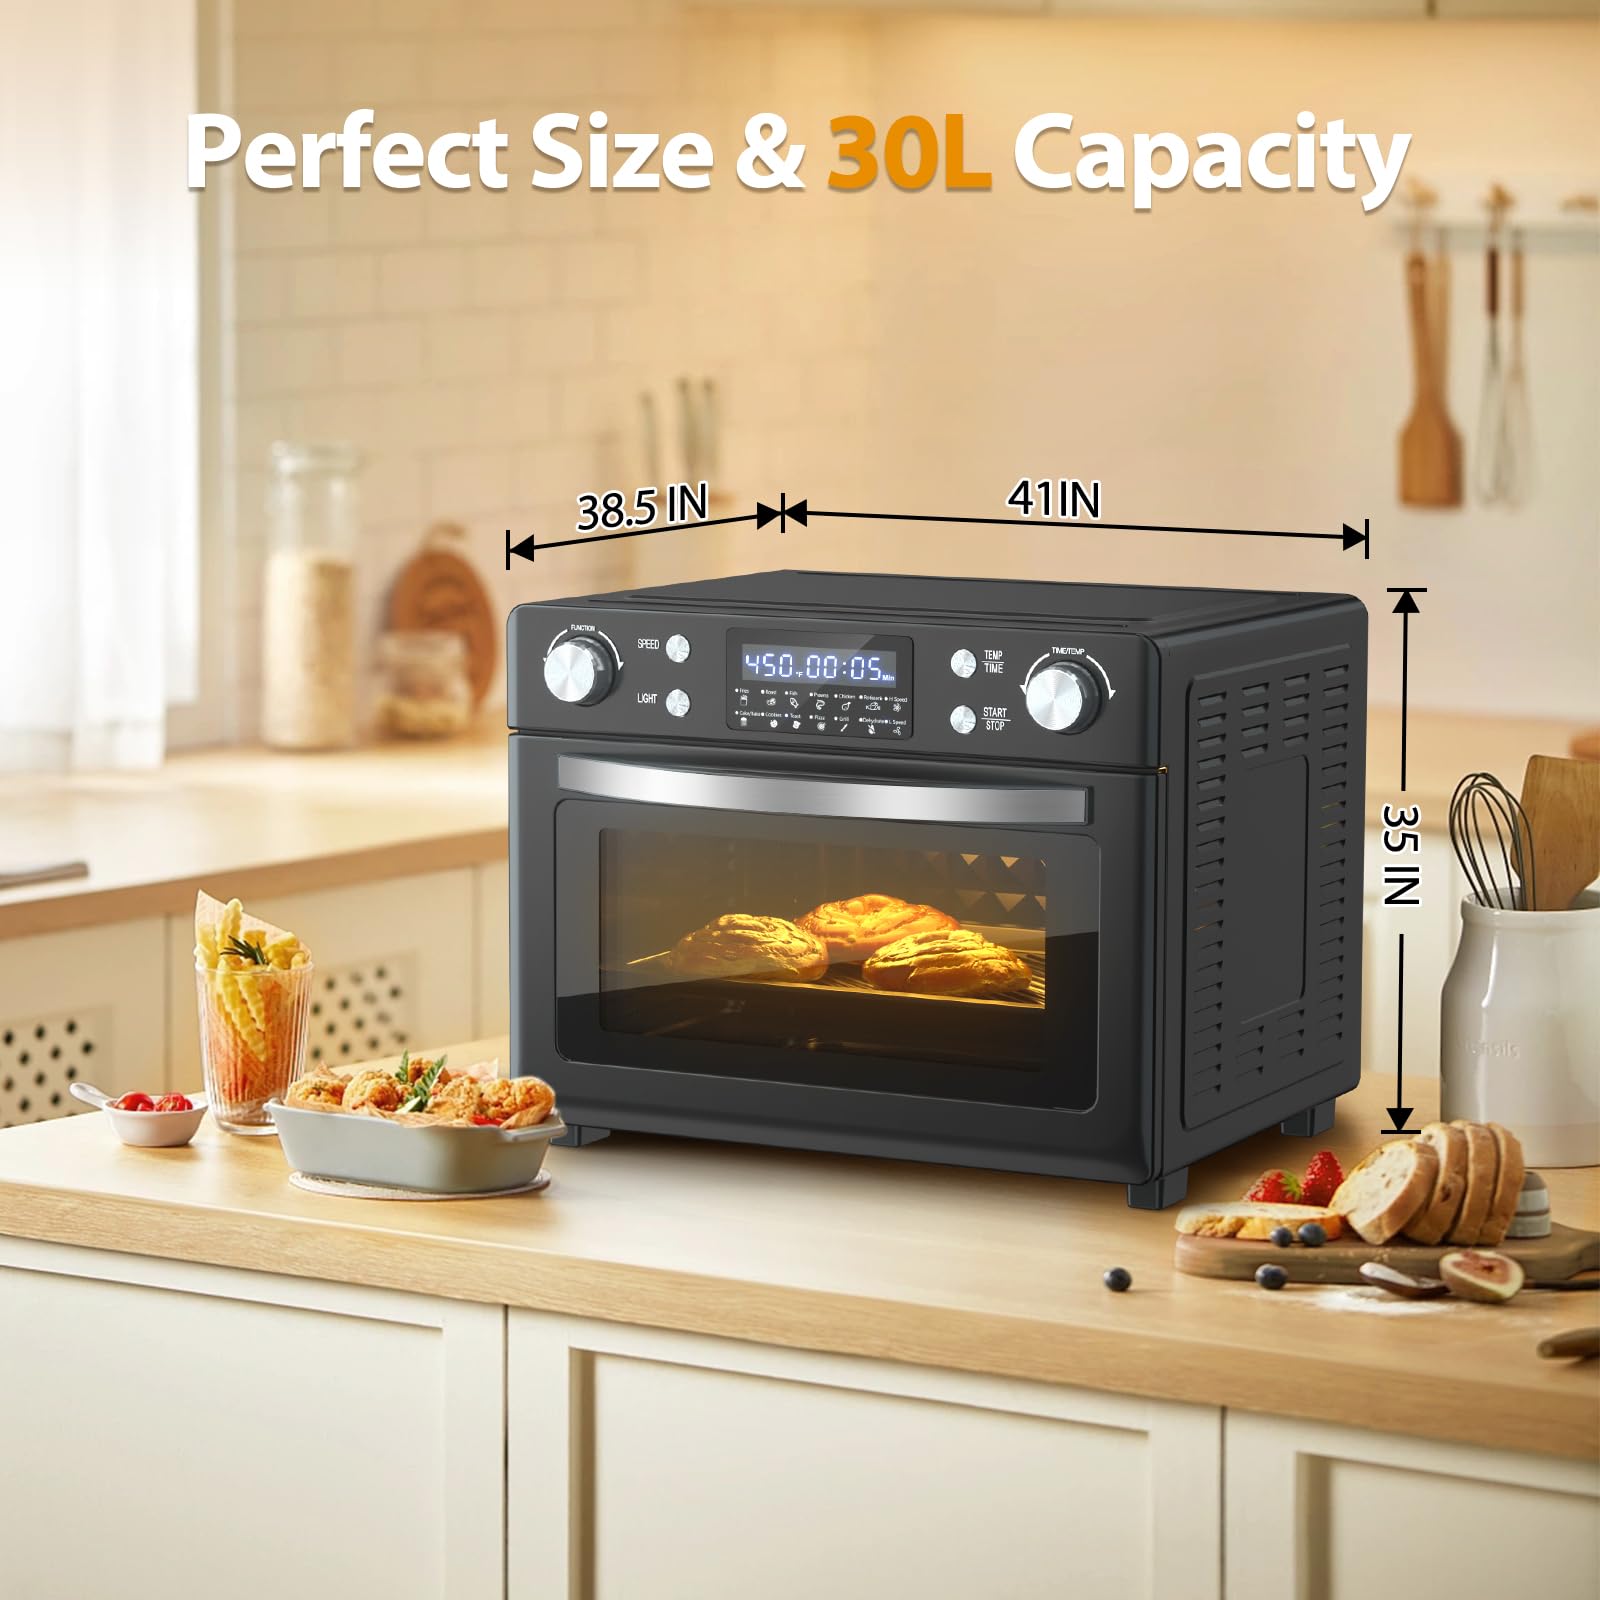 26 inch Toaster Oven Freestanding and Wall Mounted, Toaster Oven with Remote Control & Touch Screen, Adjustable Flame Color and Speed, Log/Crystal Options